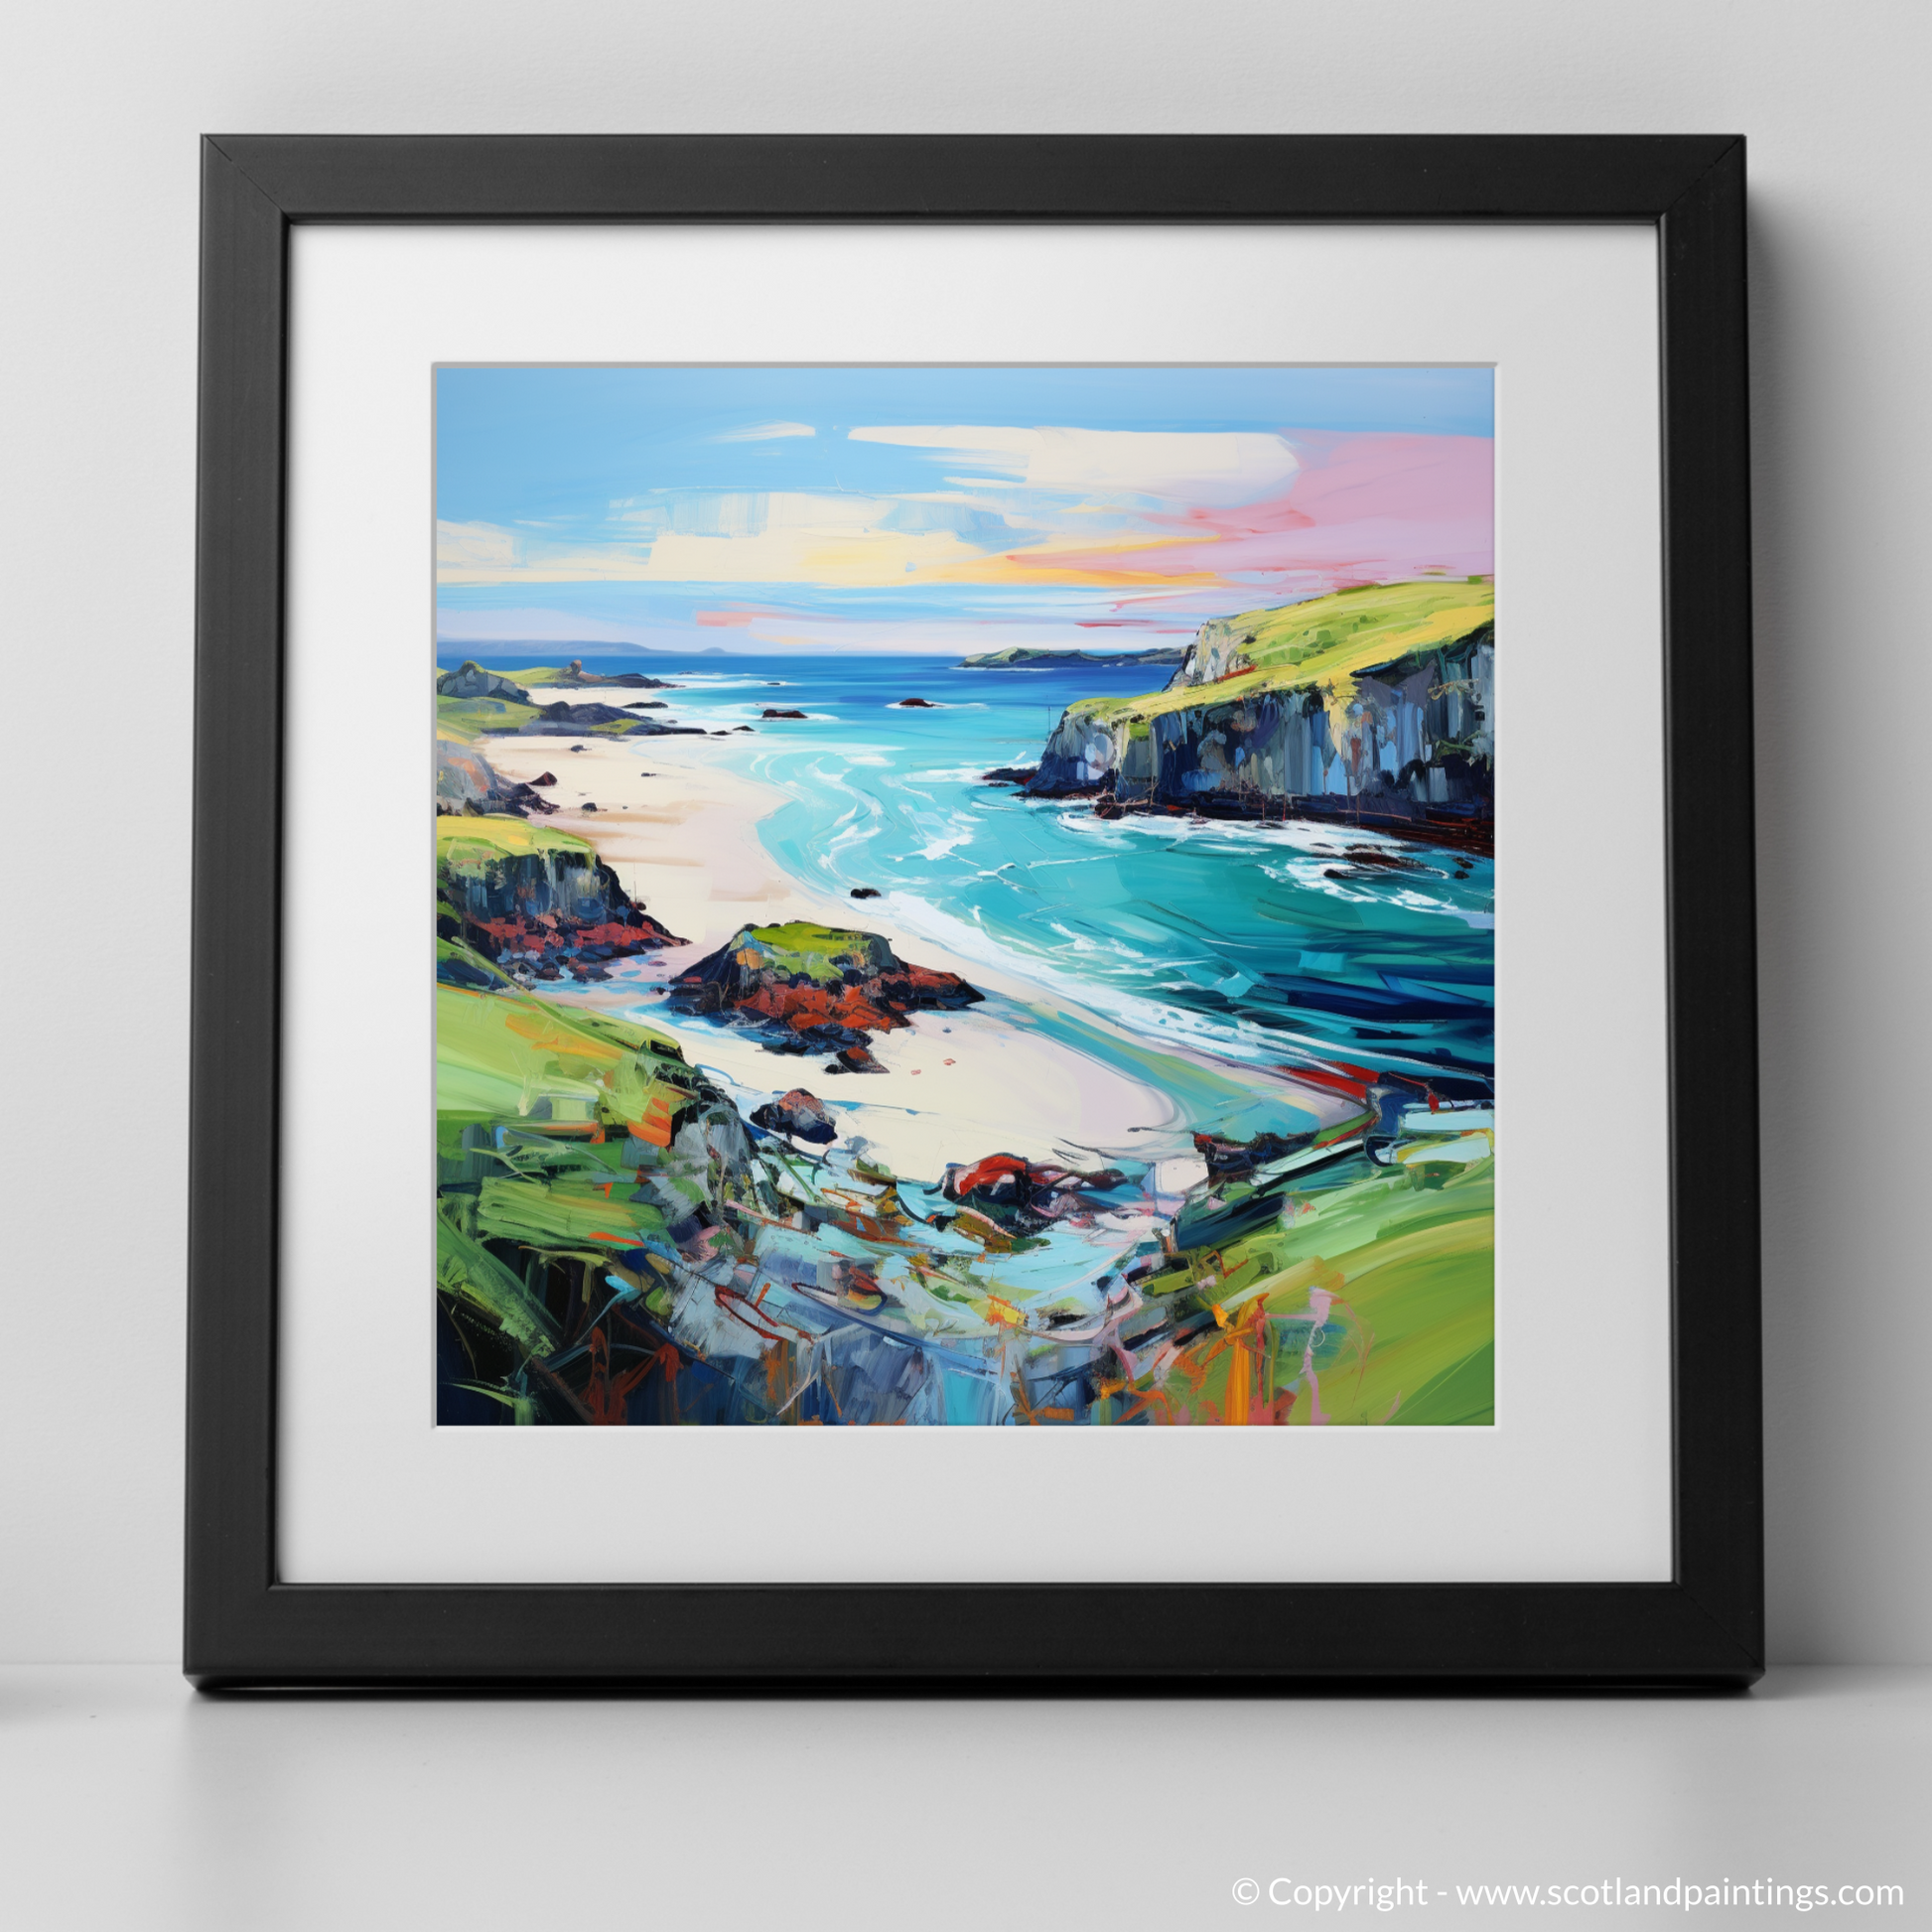 Art Print of Kiloran Bay, Isle of Colonsay with a black frame